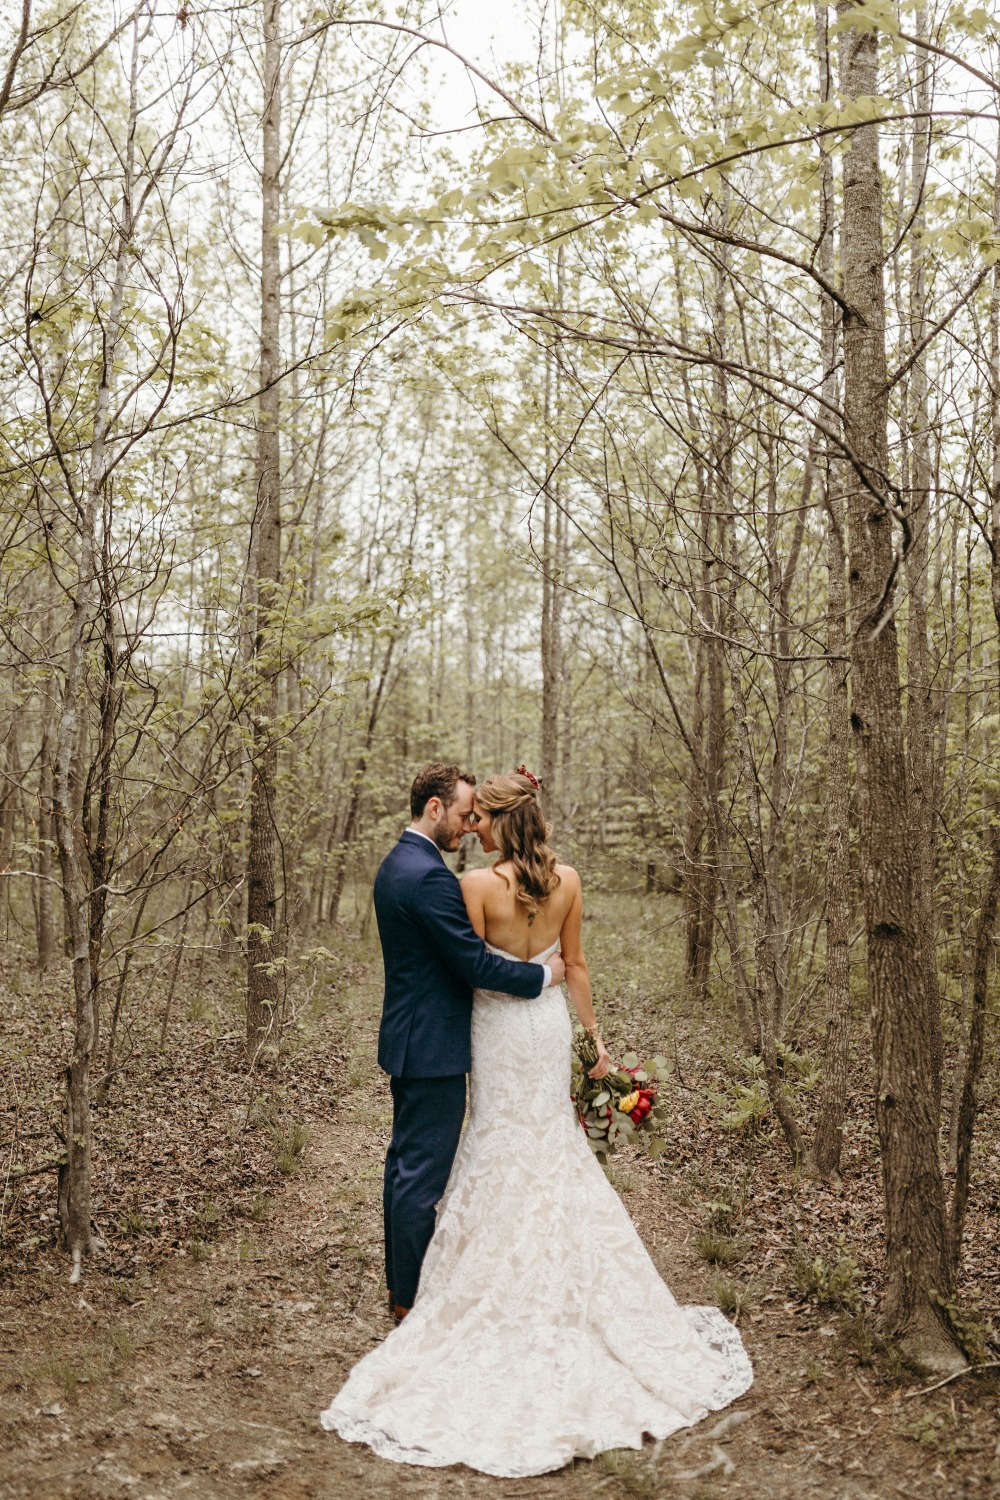 Wedding photo in the woods